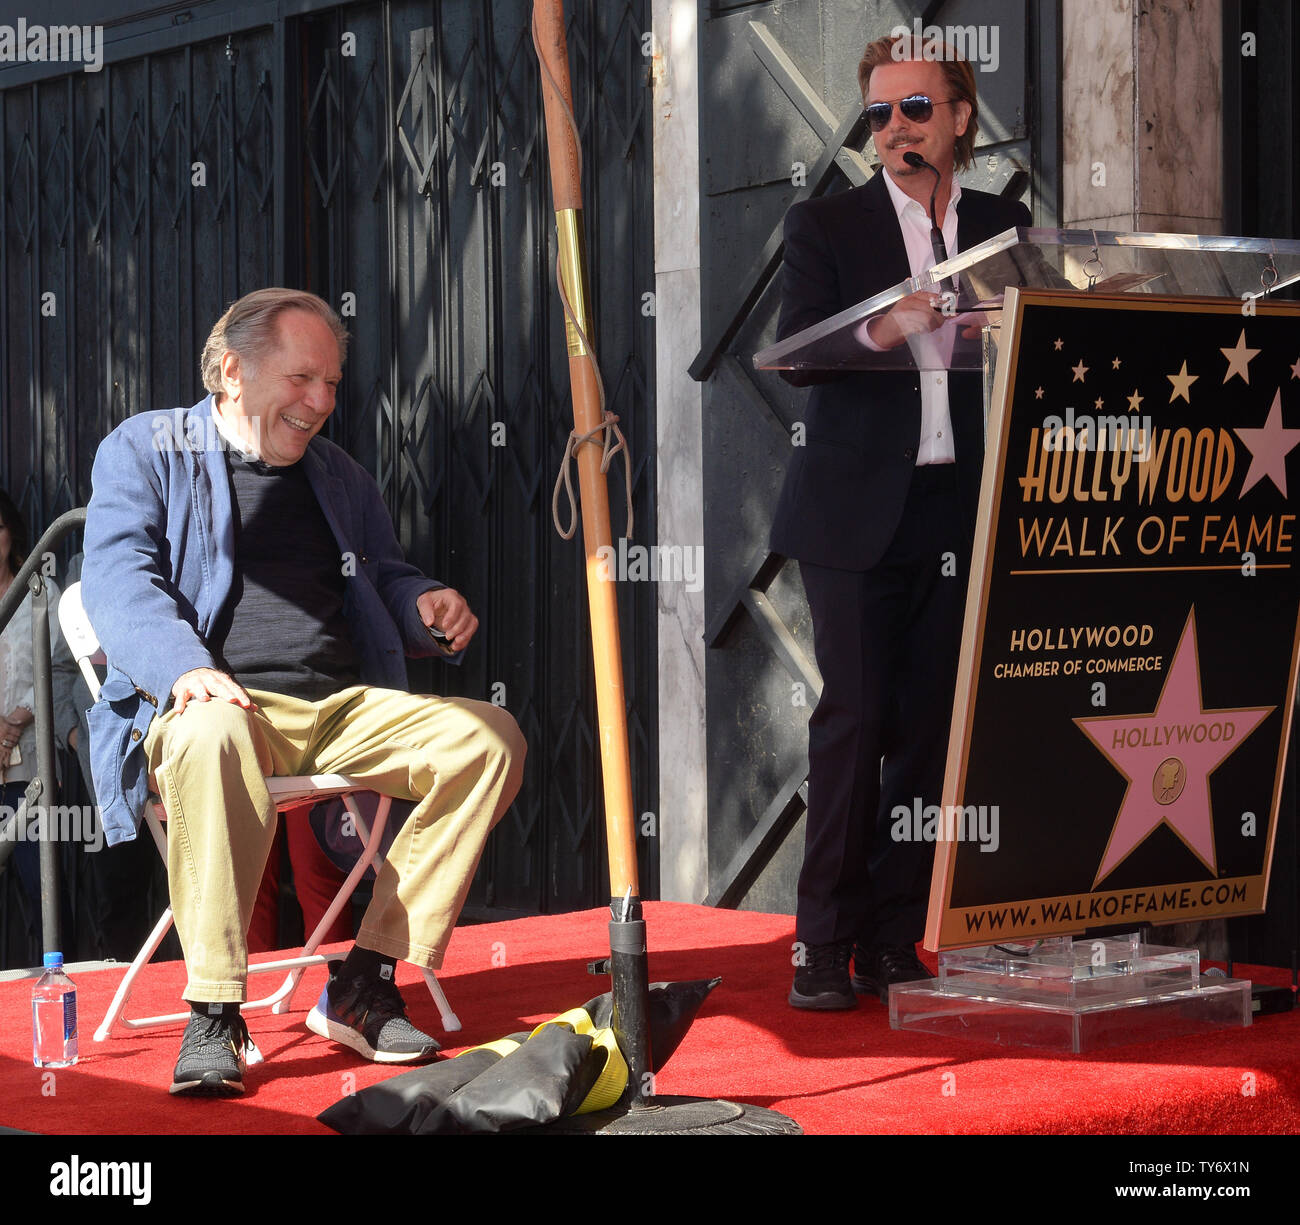 Actor George Segal (L) reacts to comments by actor David Spade during a ceremony honoring him with the 2,062nd star on the Hollywood Walk of Fame in Los Angeles on February 14, 2017. Photo by Jim Ruymen/UPI Stock Photo